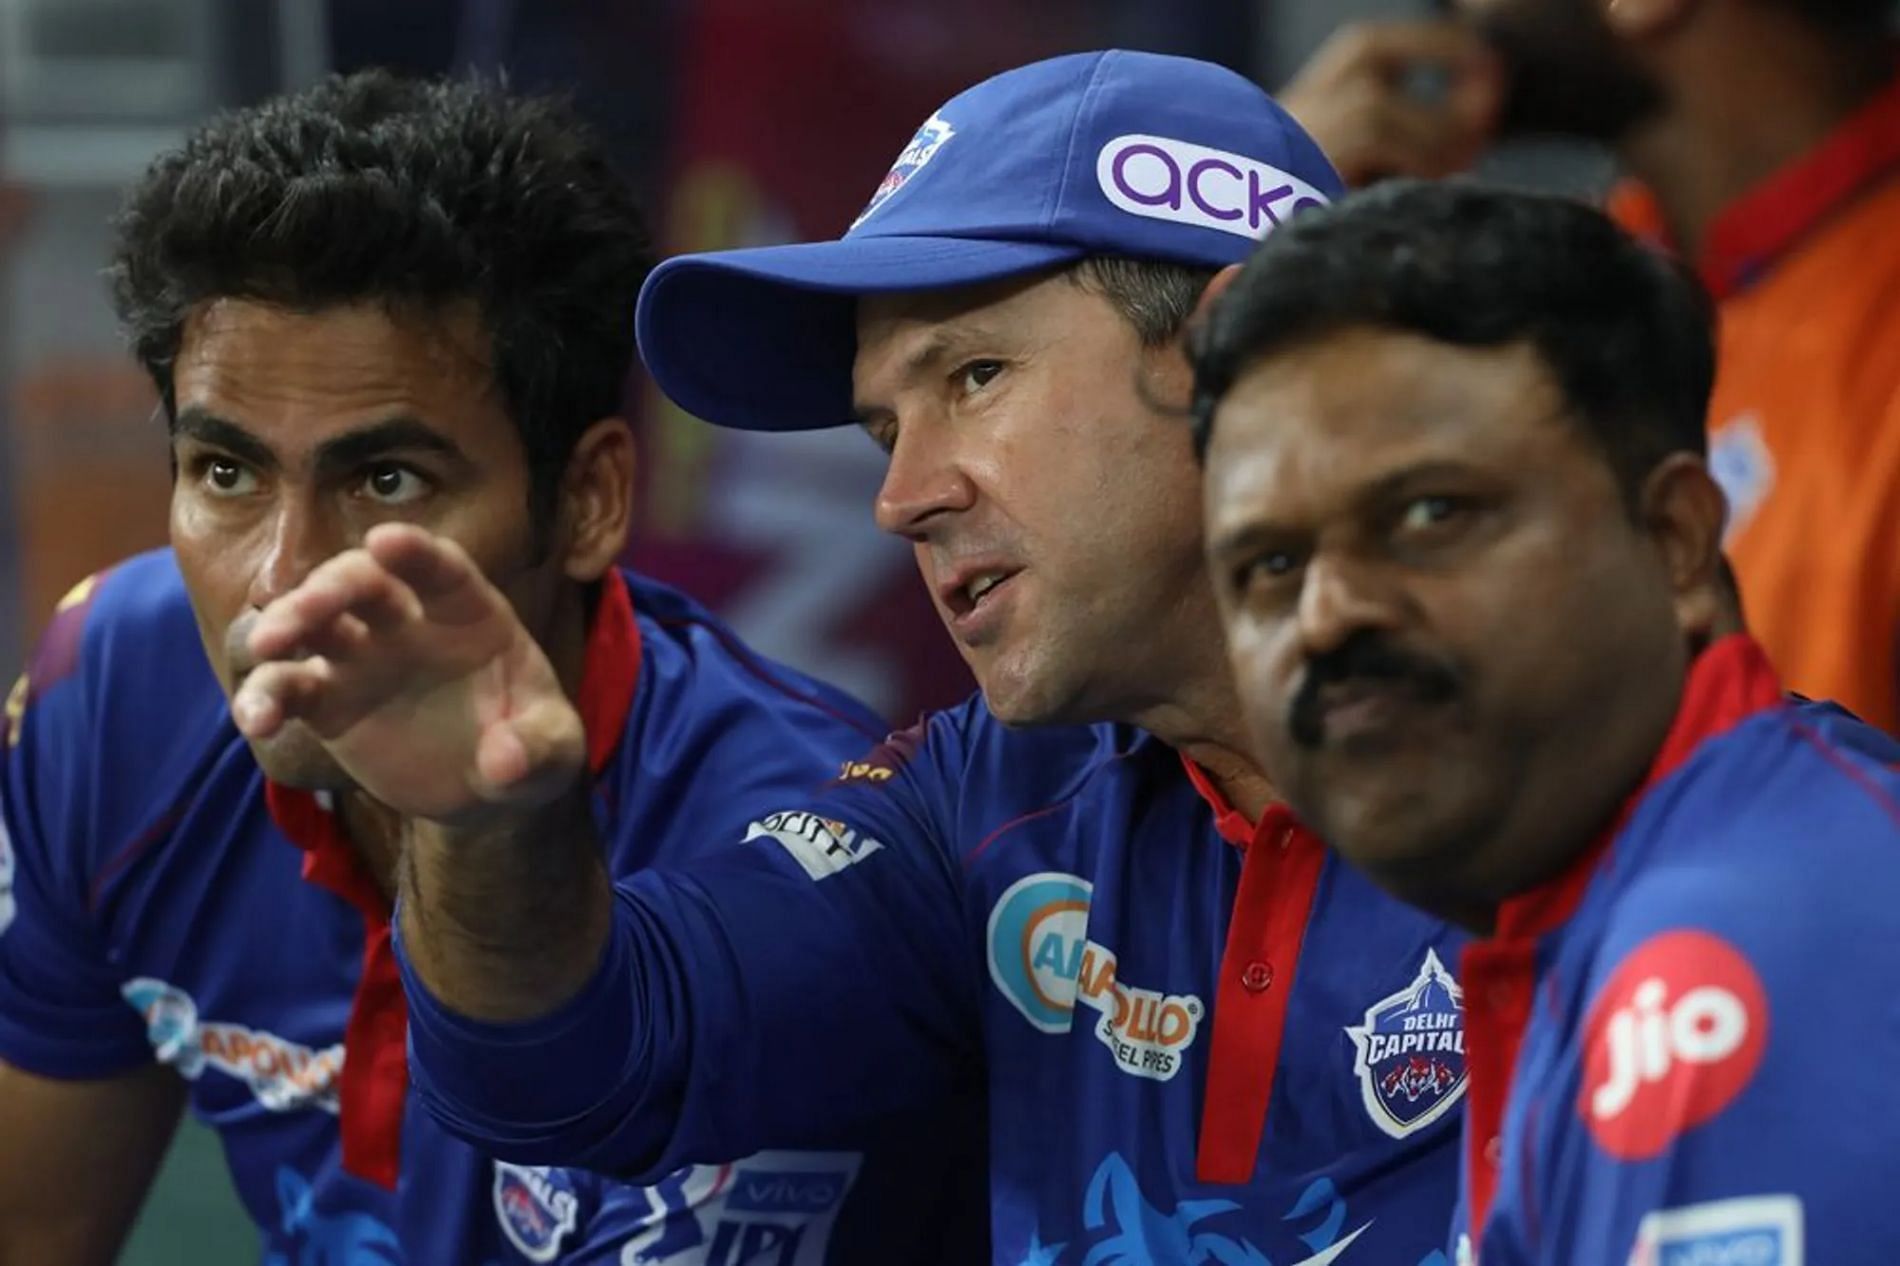 Delhi Capitals coach Ricky Ponting (middle) with Mohammad Kaif and Pravin Amre. Pic: IPLT20.COM